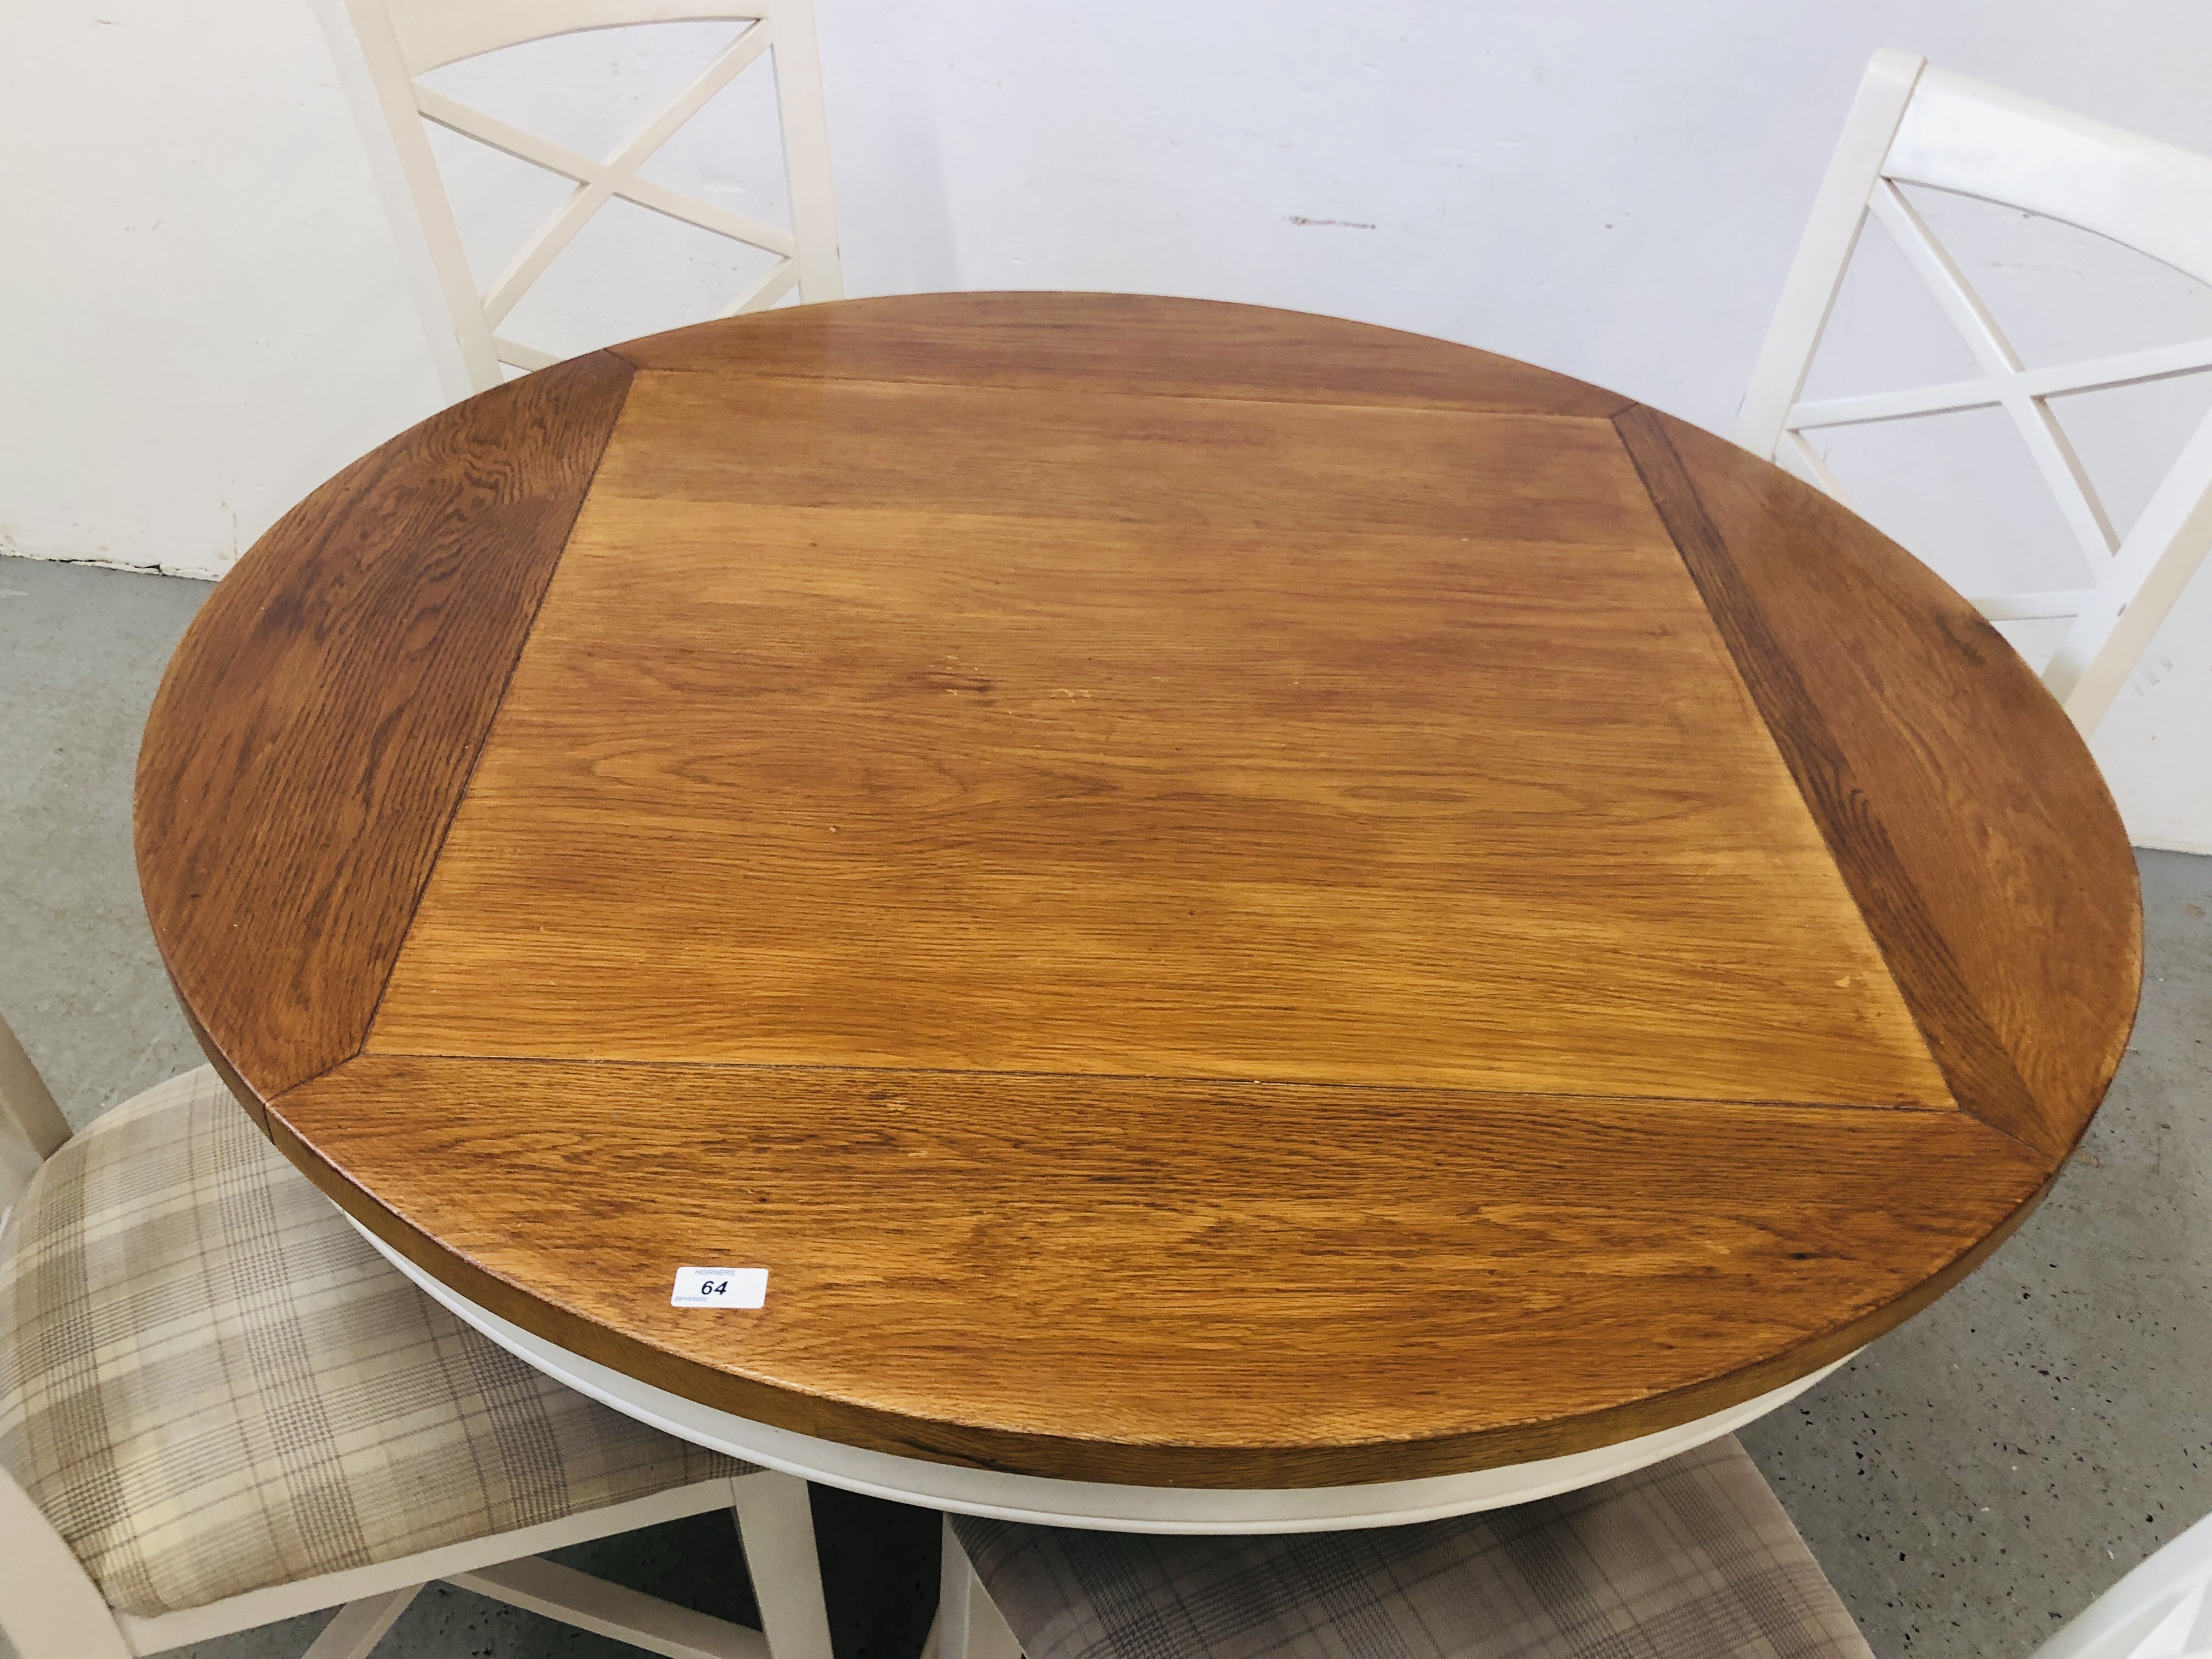 A MODERN CIRCULAR DINING TABLE COMPLETE WITH 4 CHAIRS - Image 2 of 6